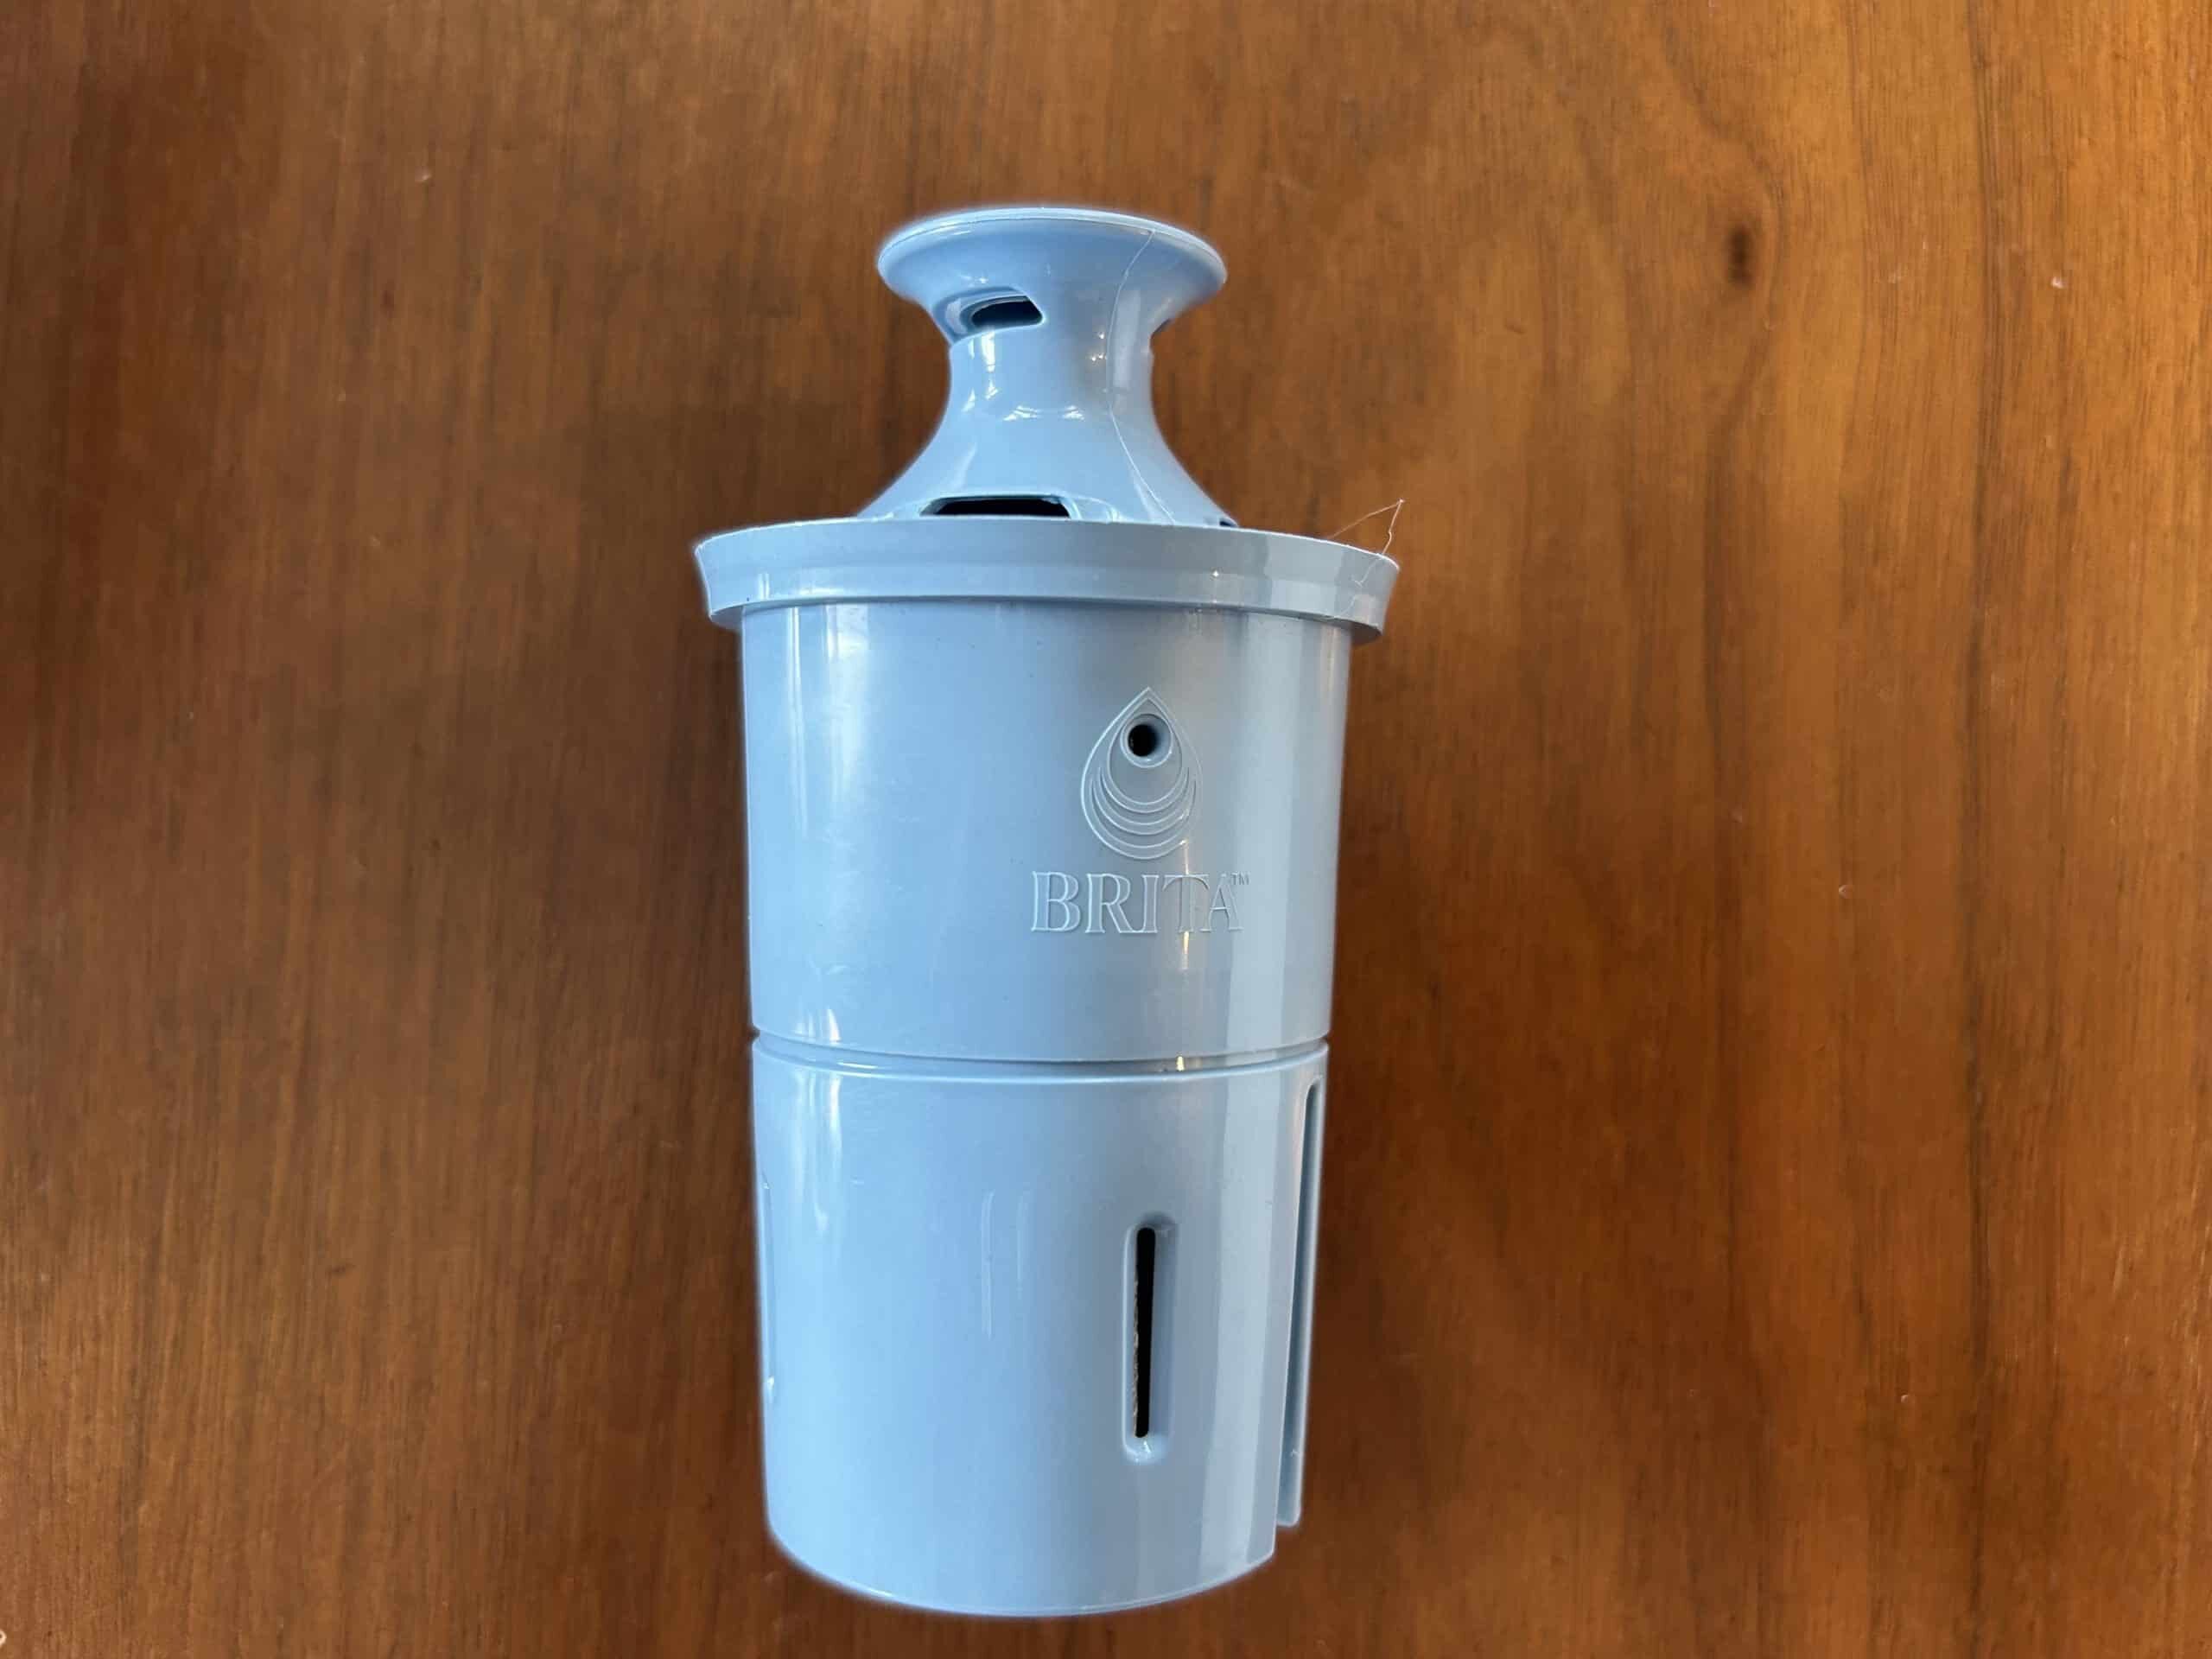 Only One Brita Filter Removes Lead From Drinking Water - LeafScore